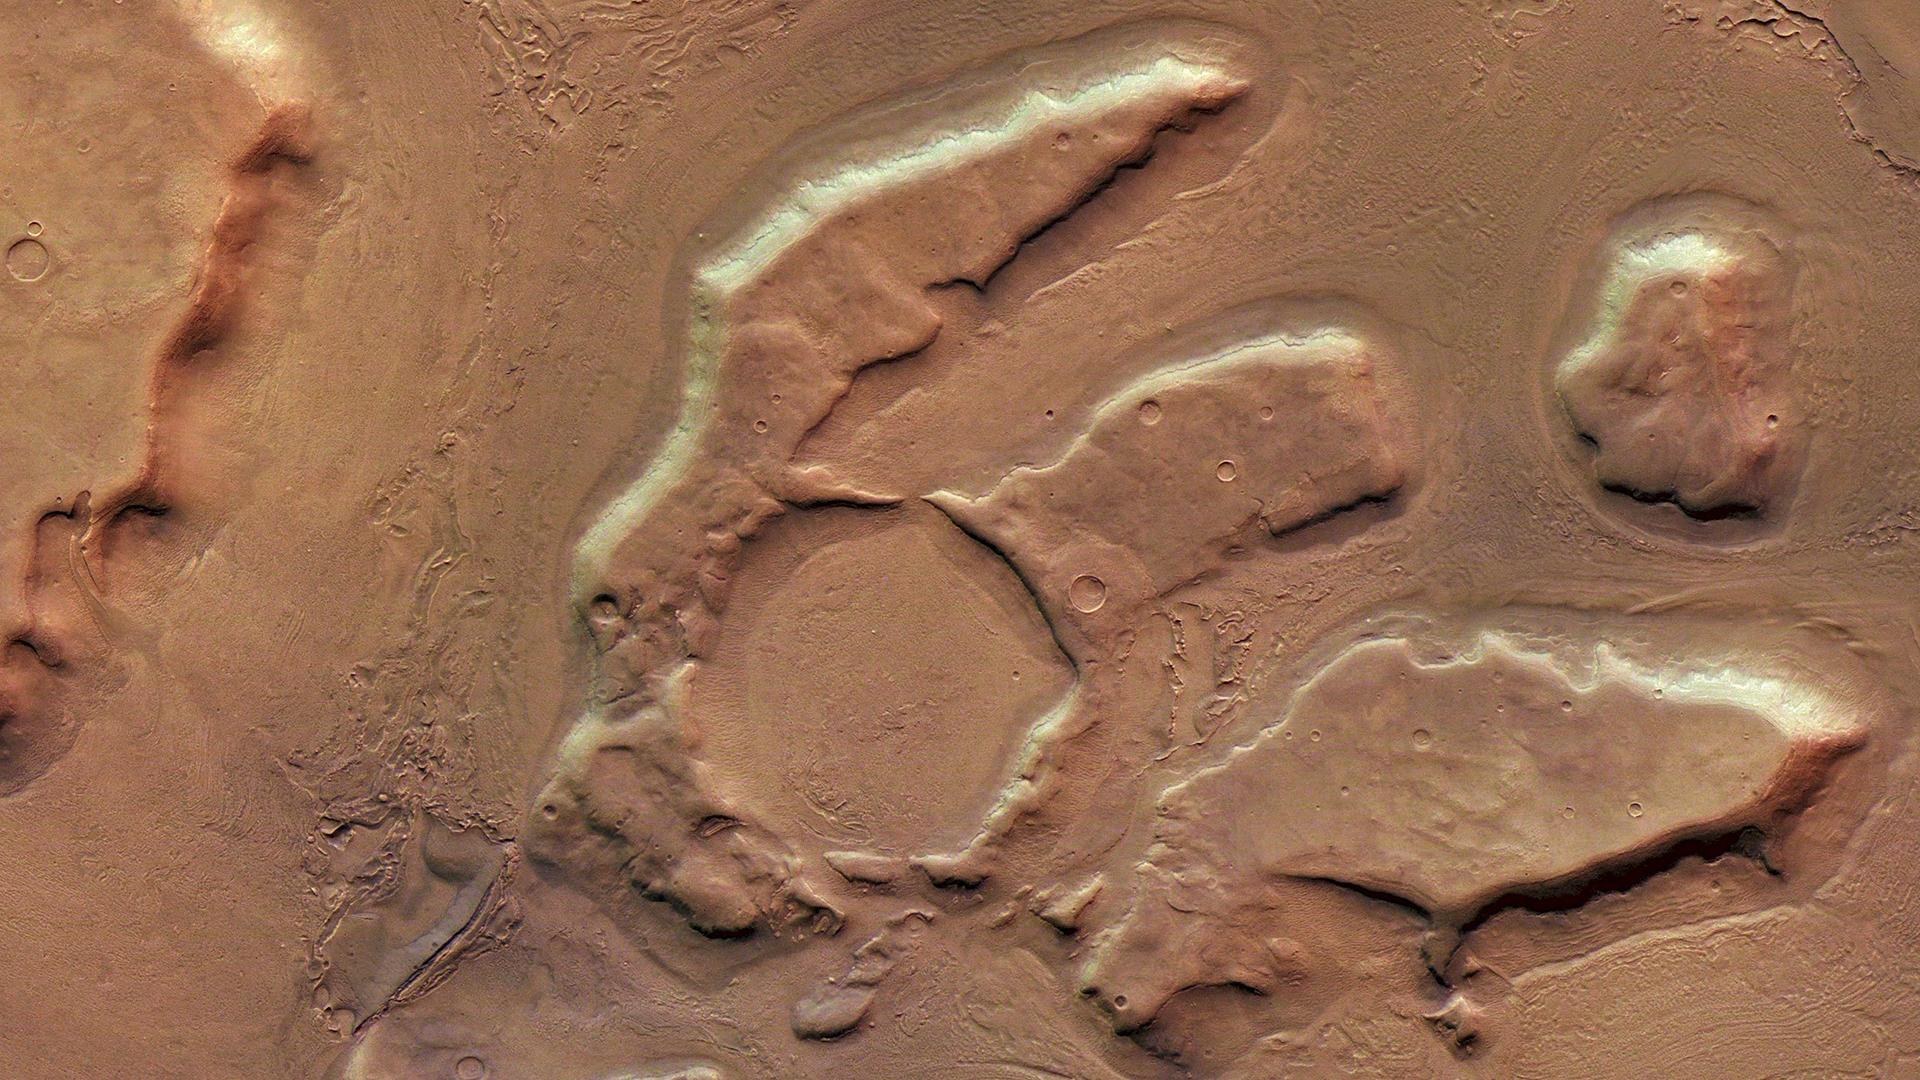 Image Detail 3: Glacial flow structures between mesas